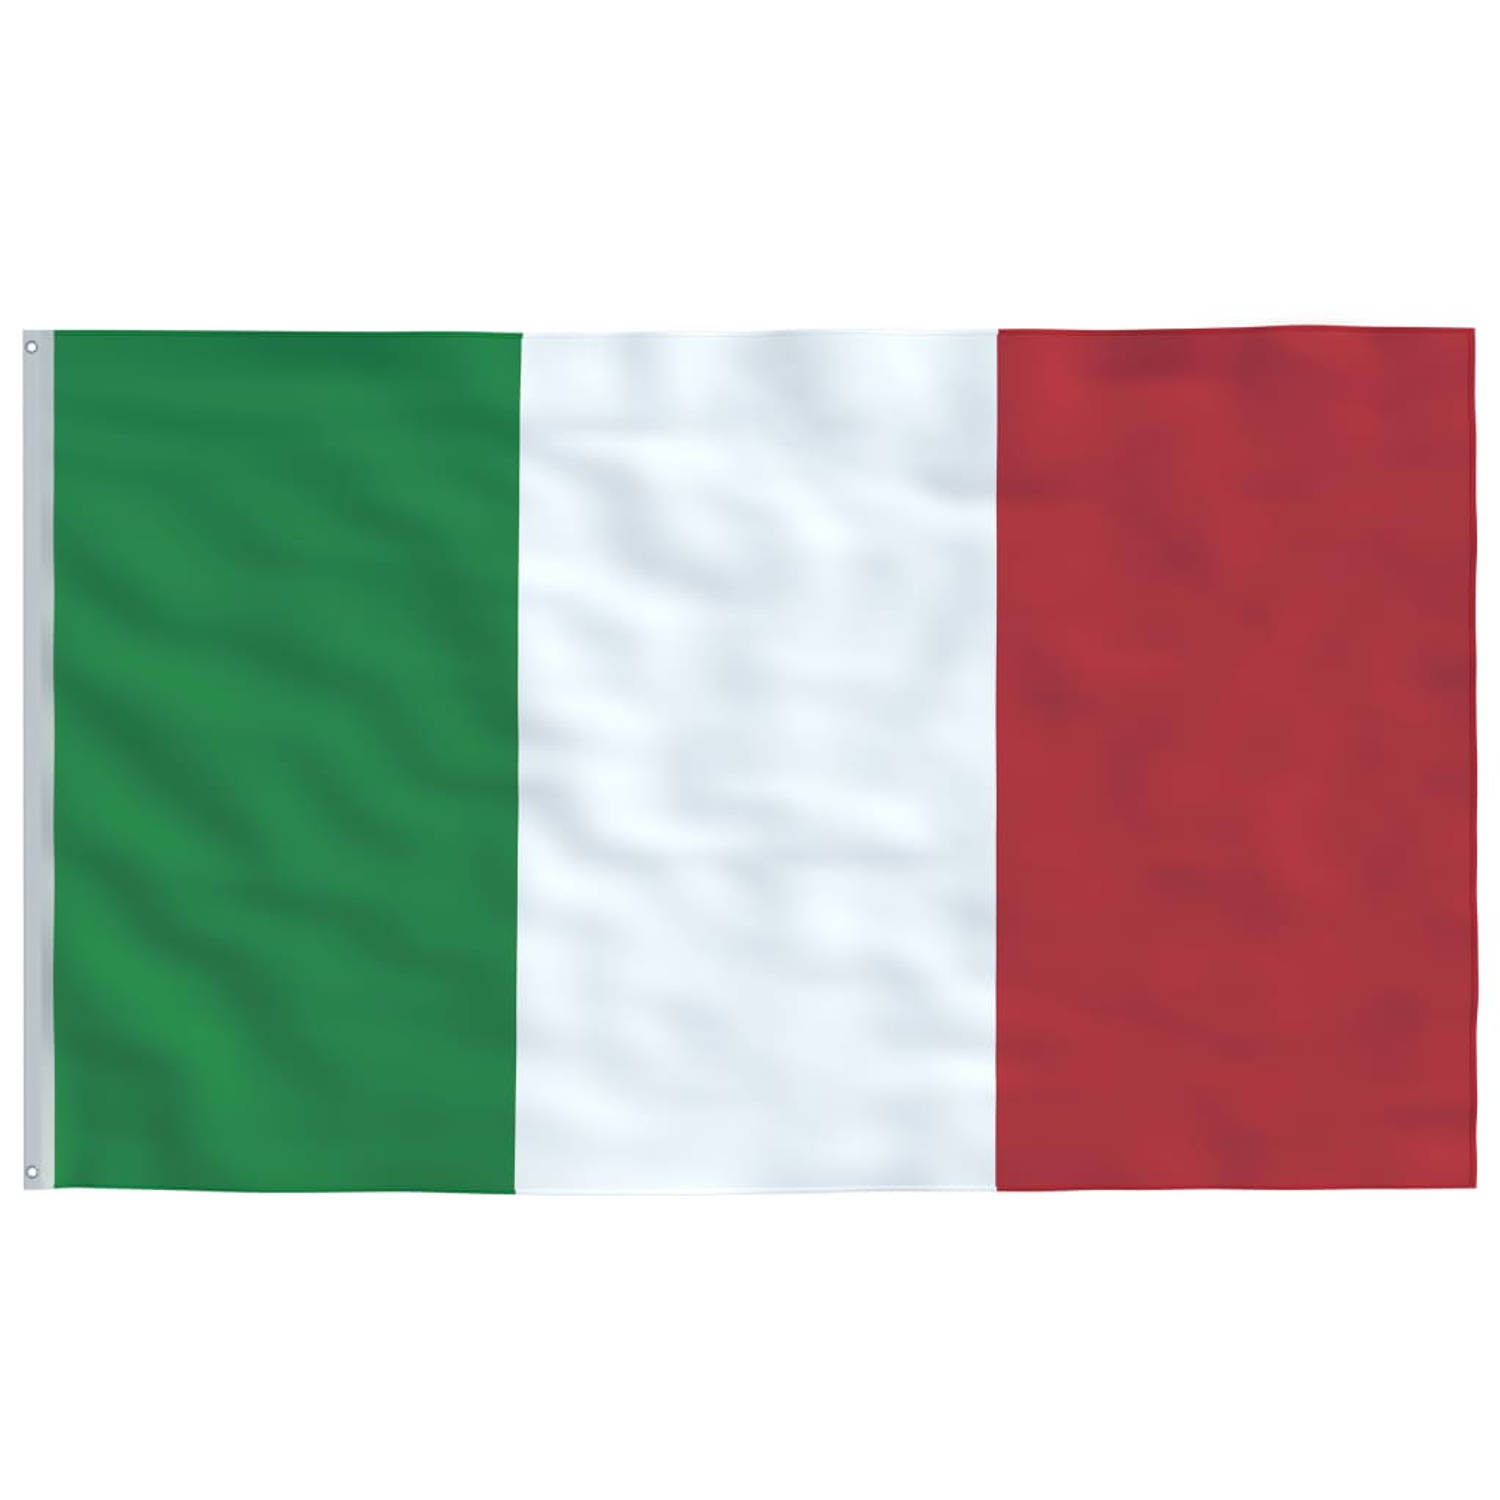 The Living Store Italiaanse Vlag - Tuin - Sport - 90x150 cm - Polyester